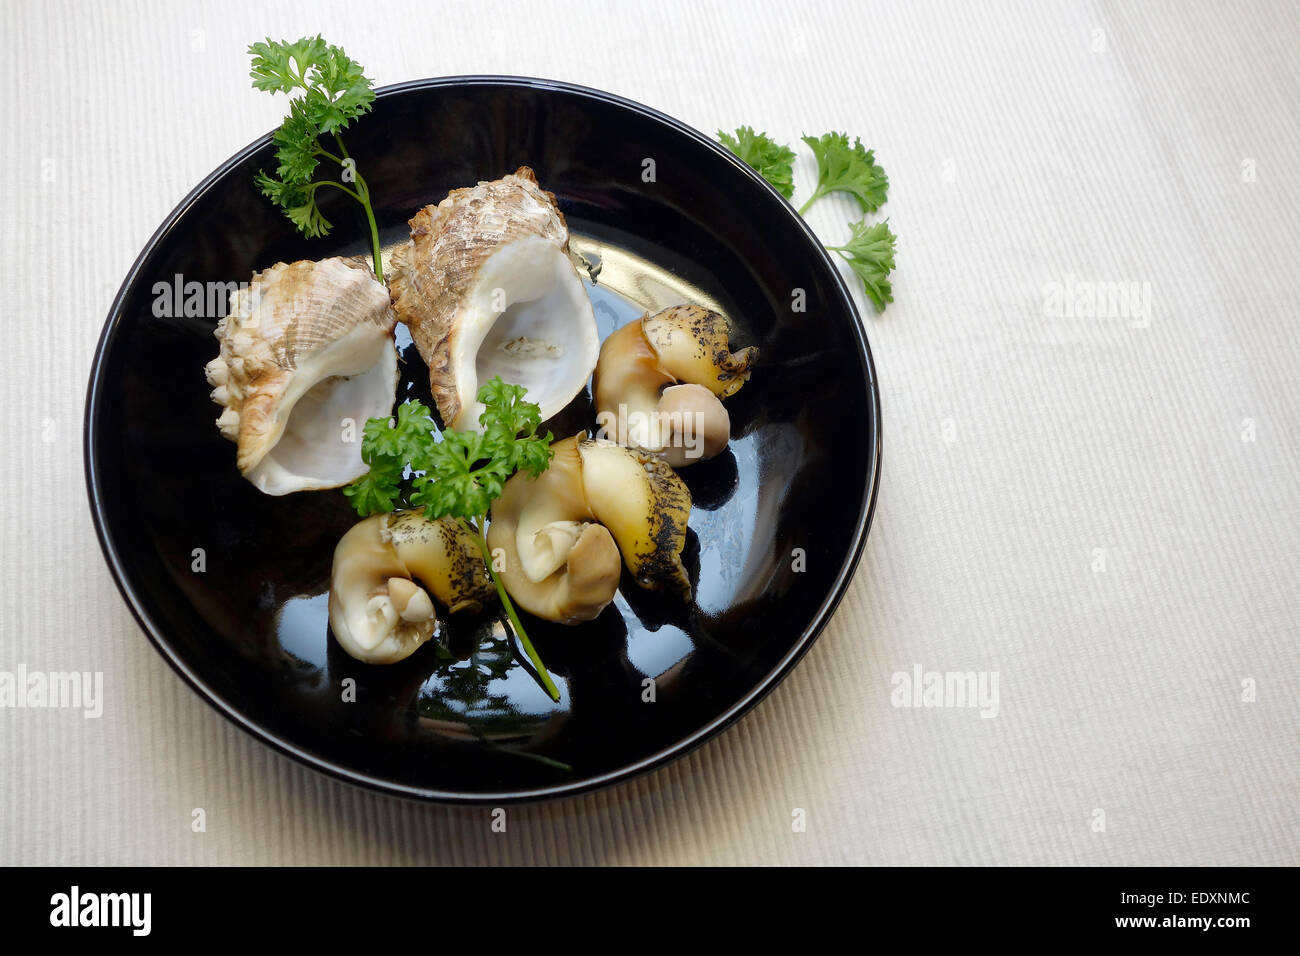 Boiled whelks for simple antipasto served on black saucer. Stock Photo